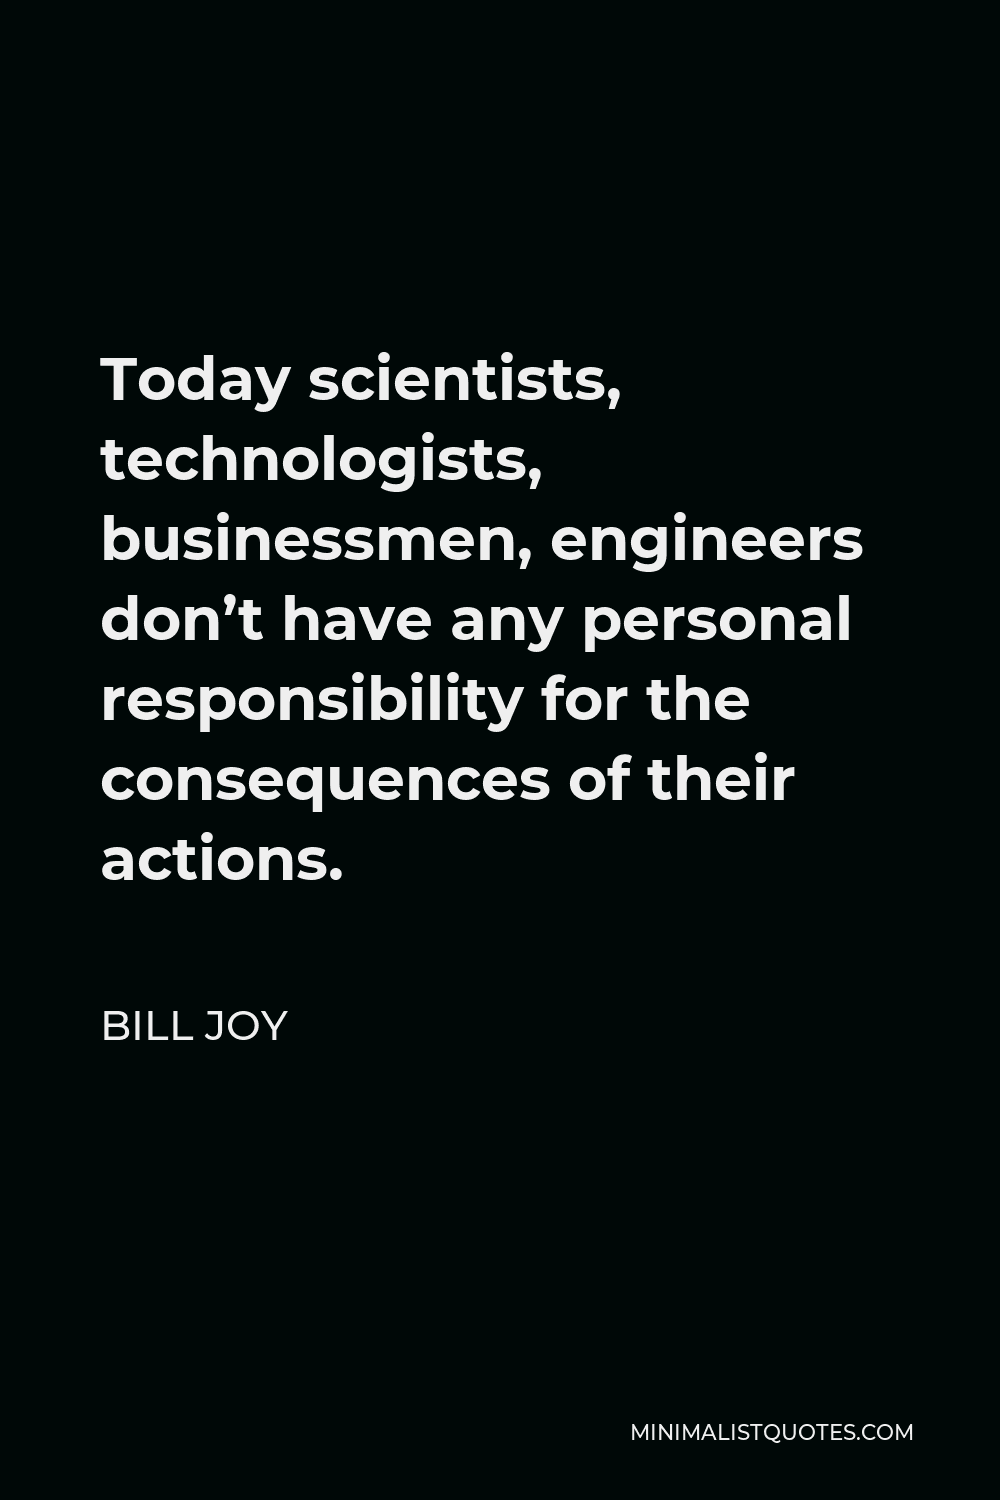 Bill Joy Quote - Today scientists, technologists, businessmen, engineers don’t have any personal responsibility for the consequences of their actions.